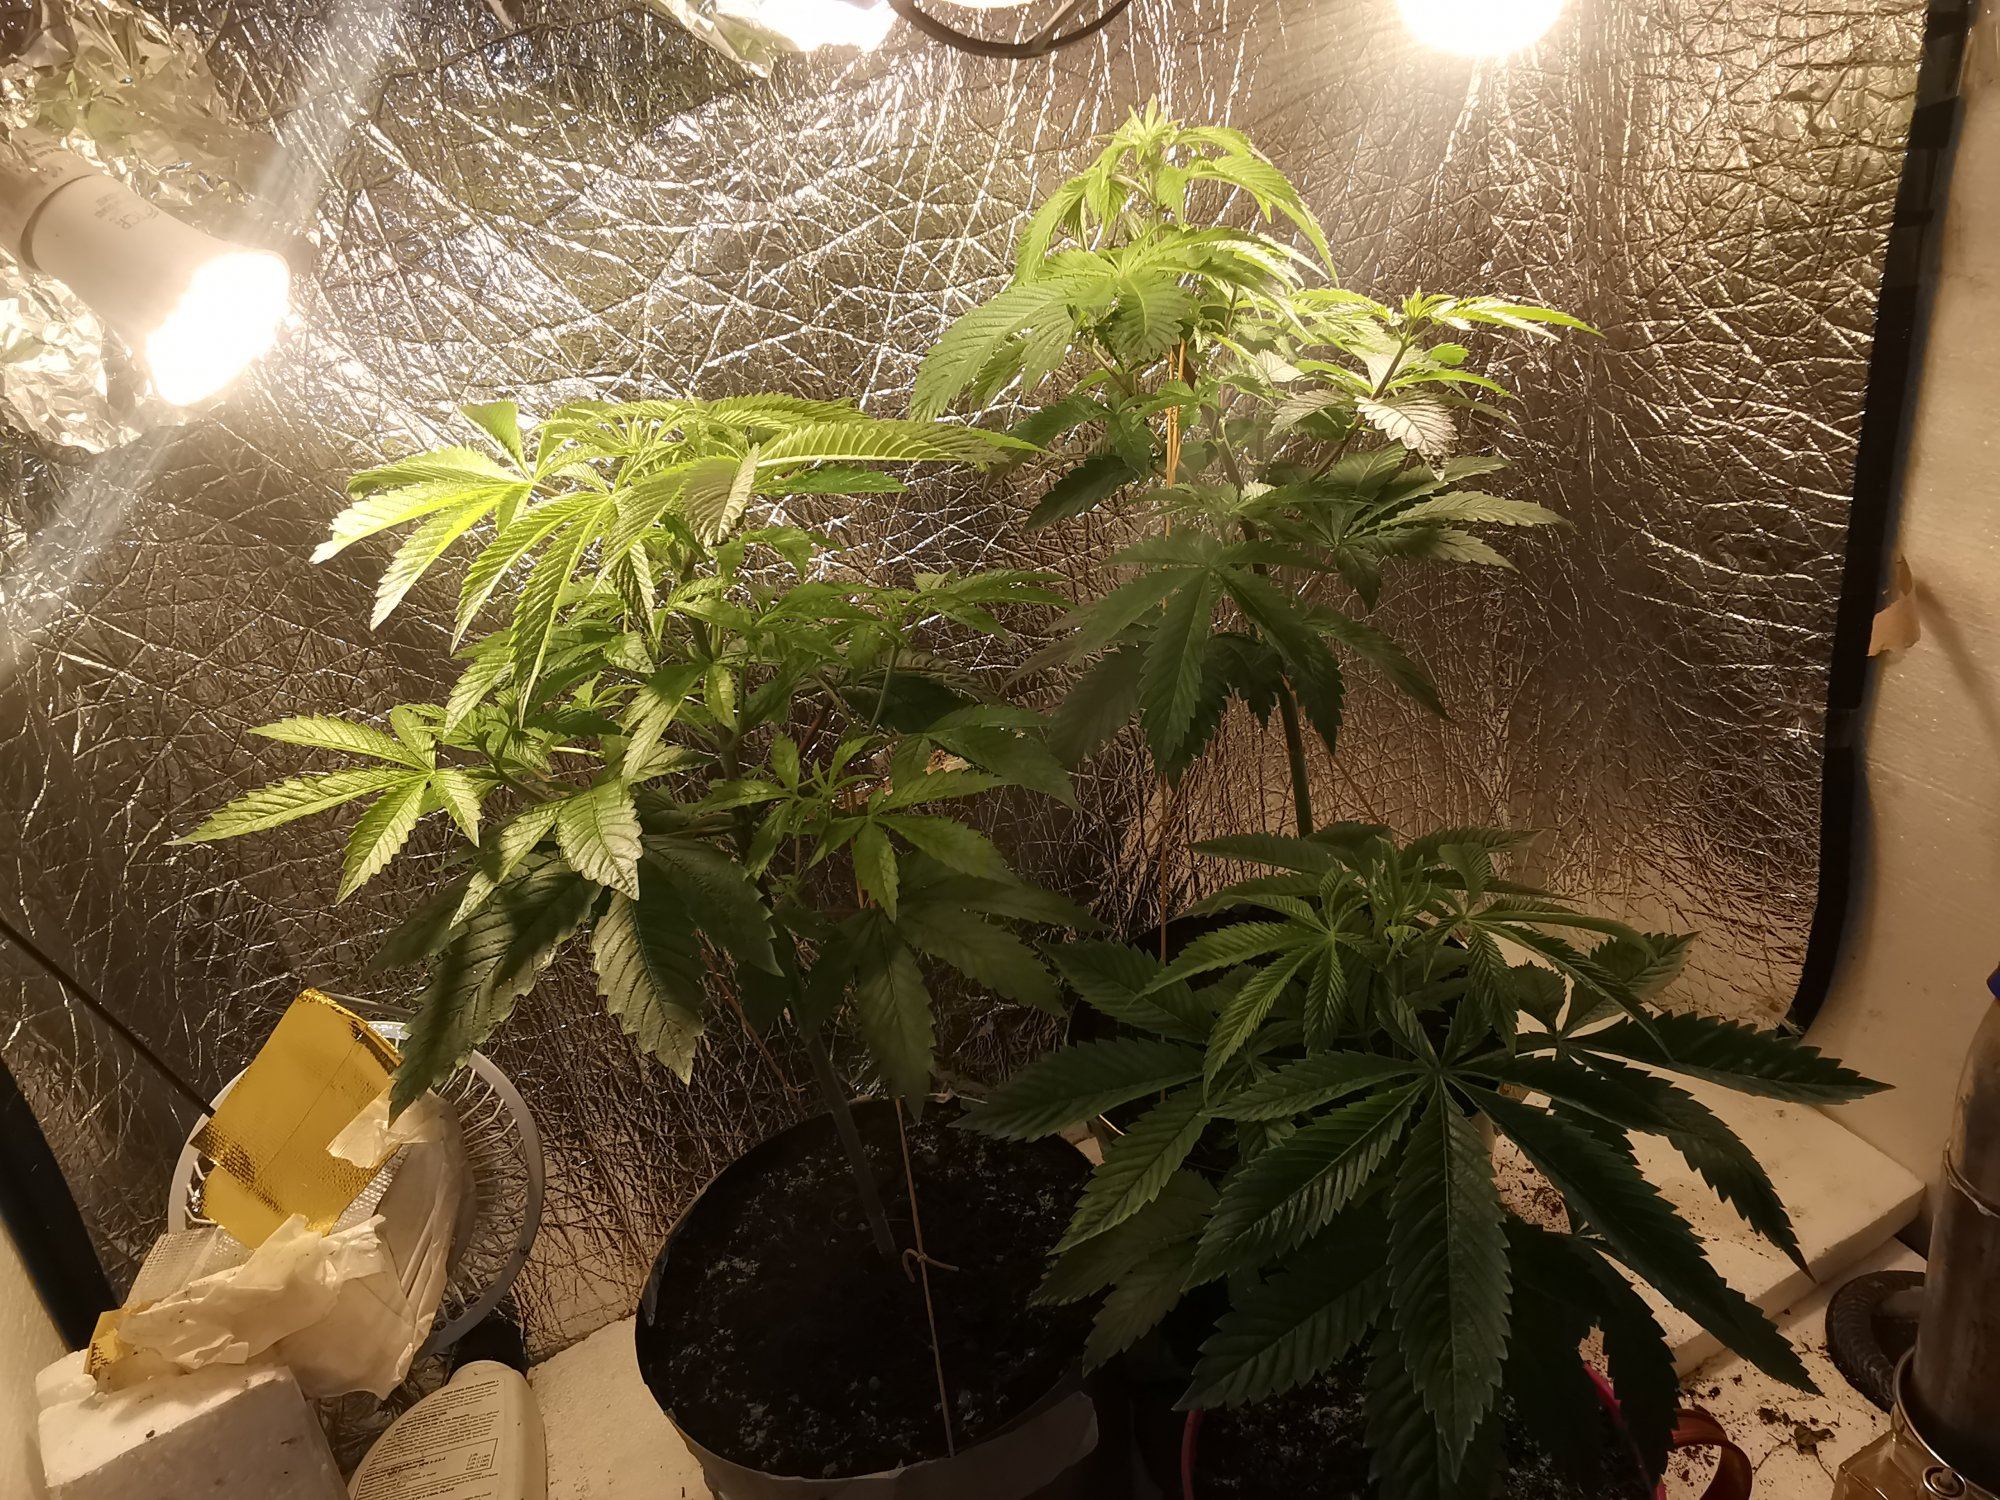 4 weeks into flower put into cycle not mature enough does it look okay now